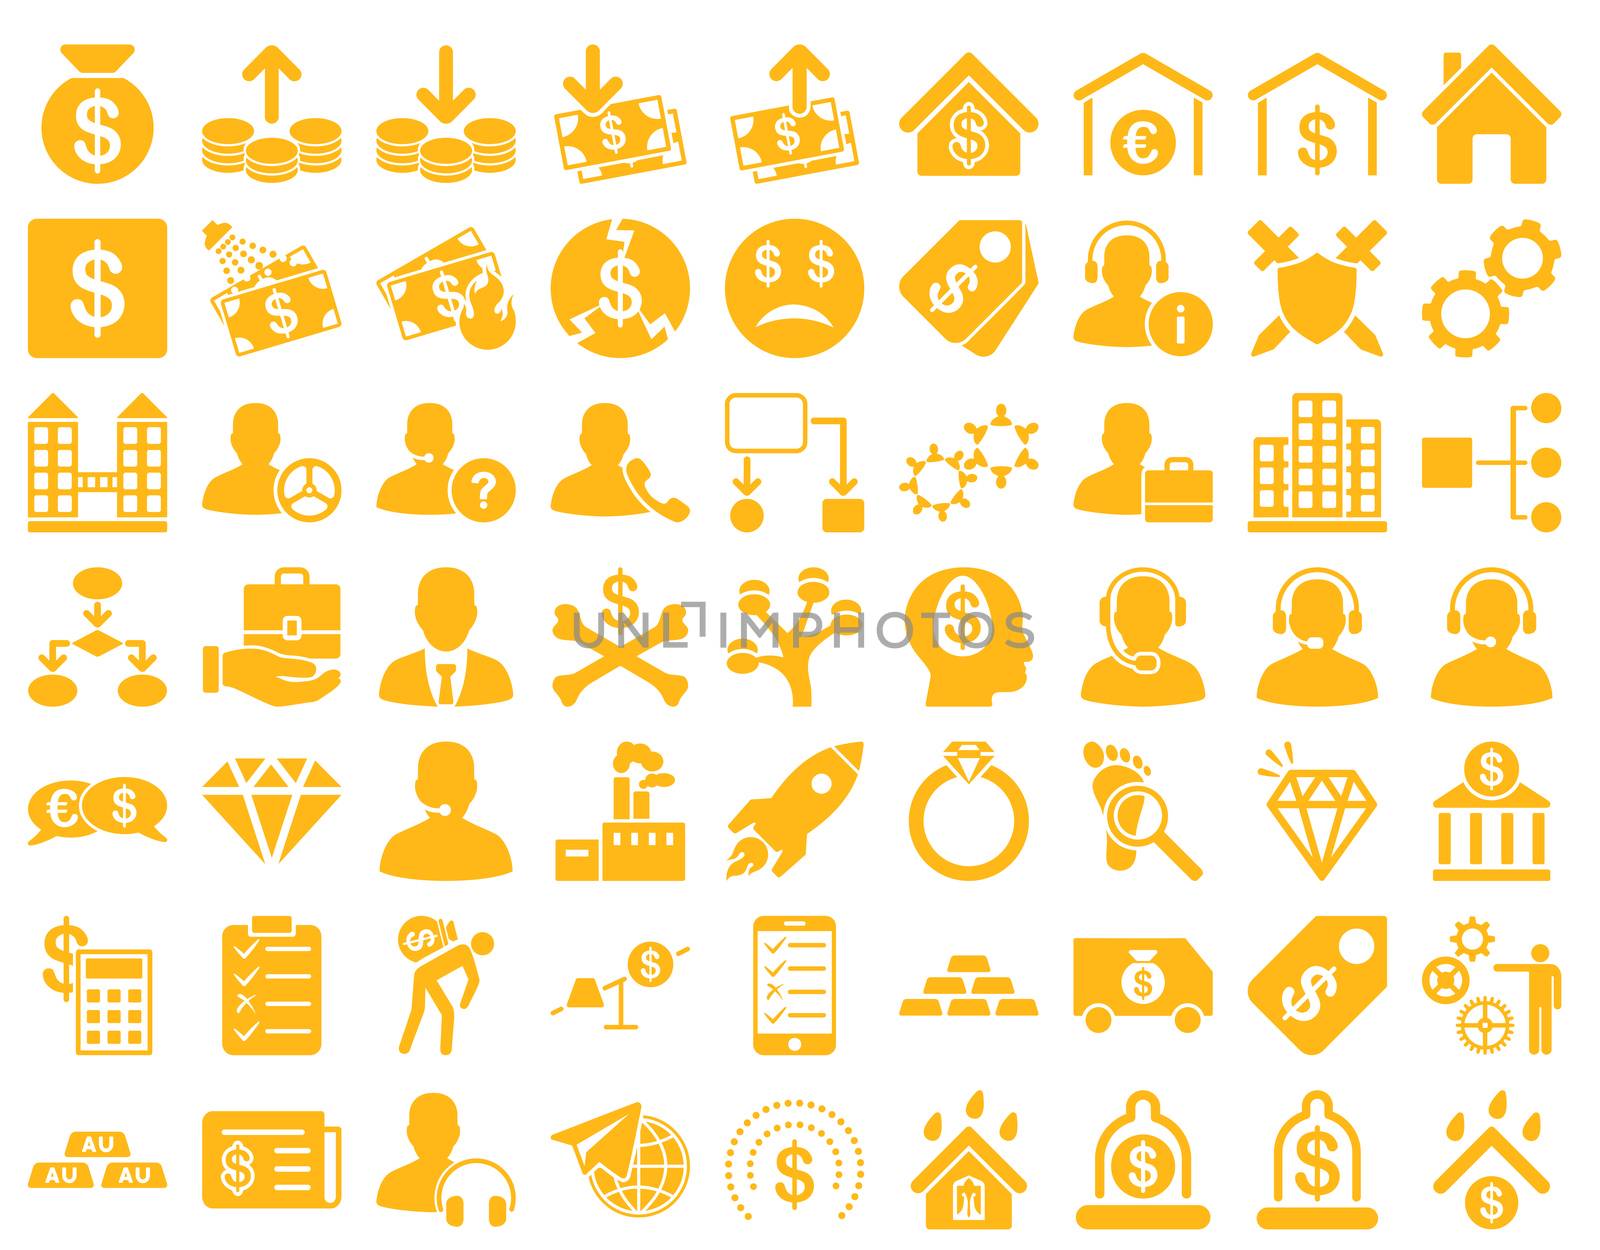 Commerce Icons. These flat icons use yellow color. Raster images are isolated on a white background.